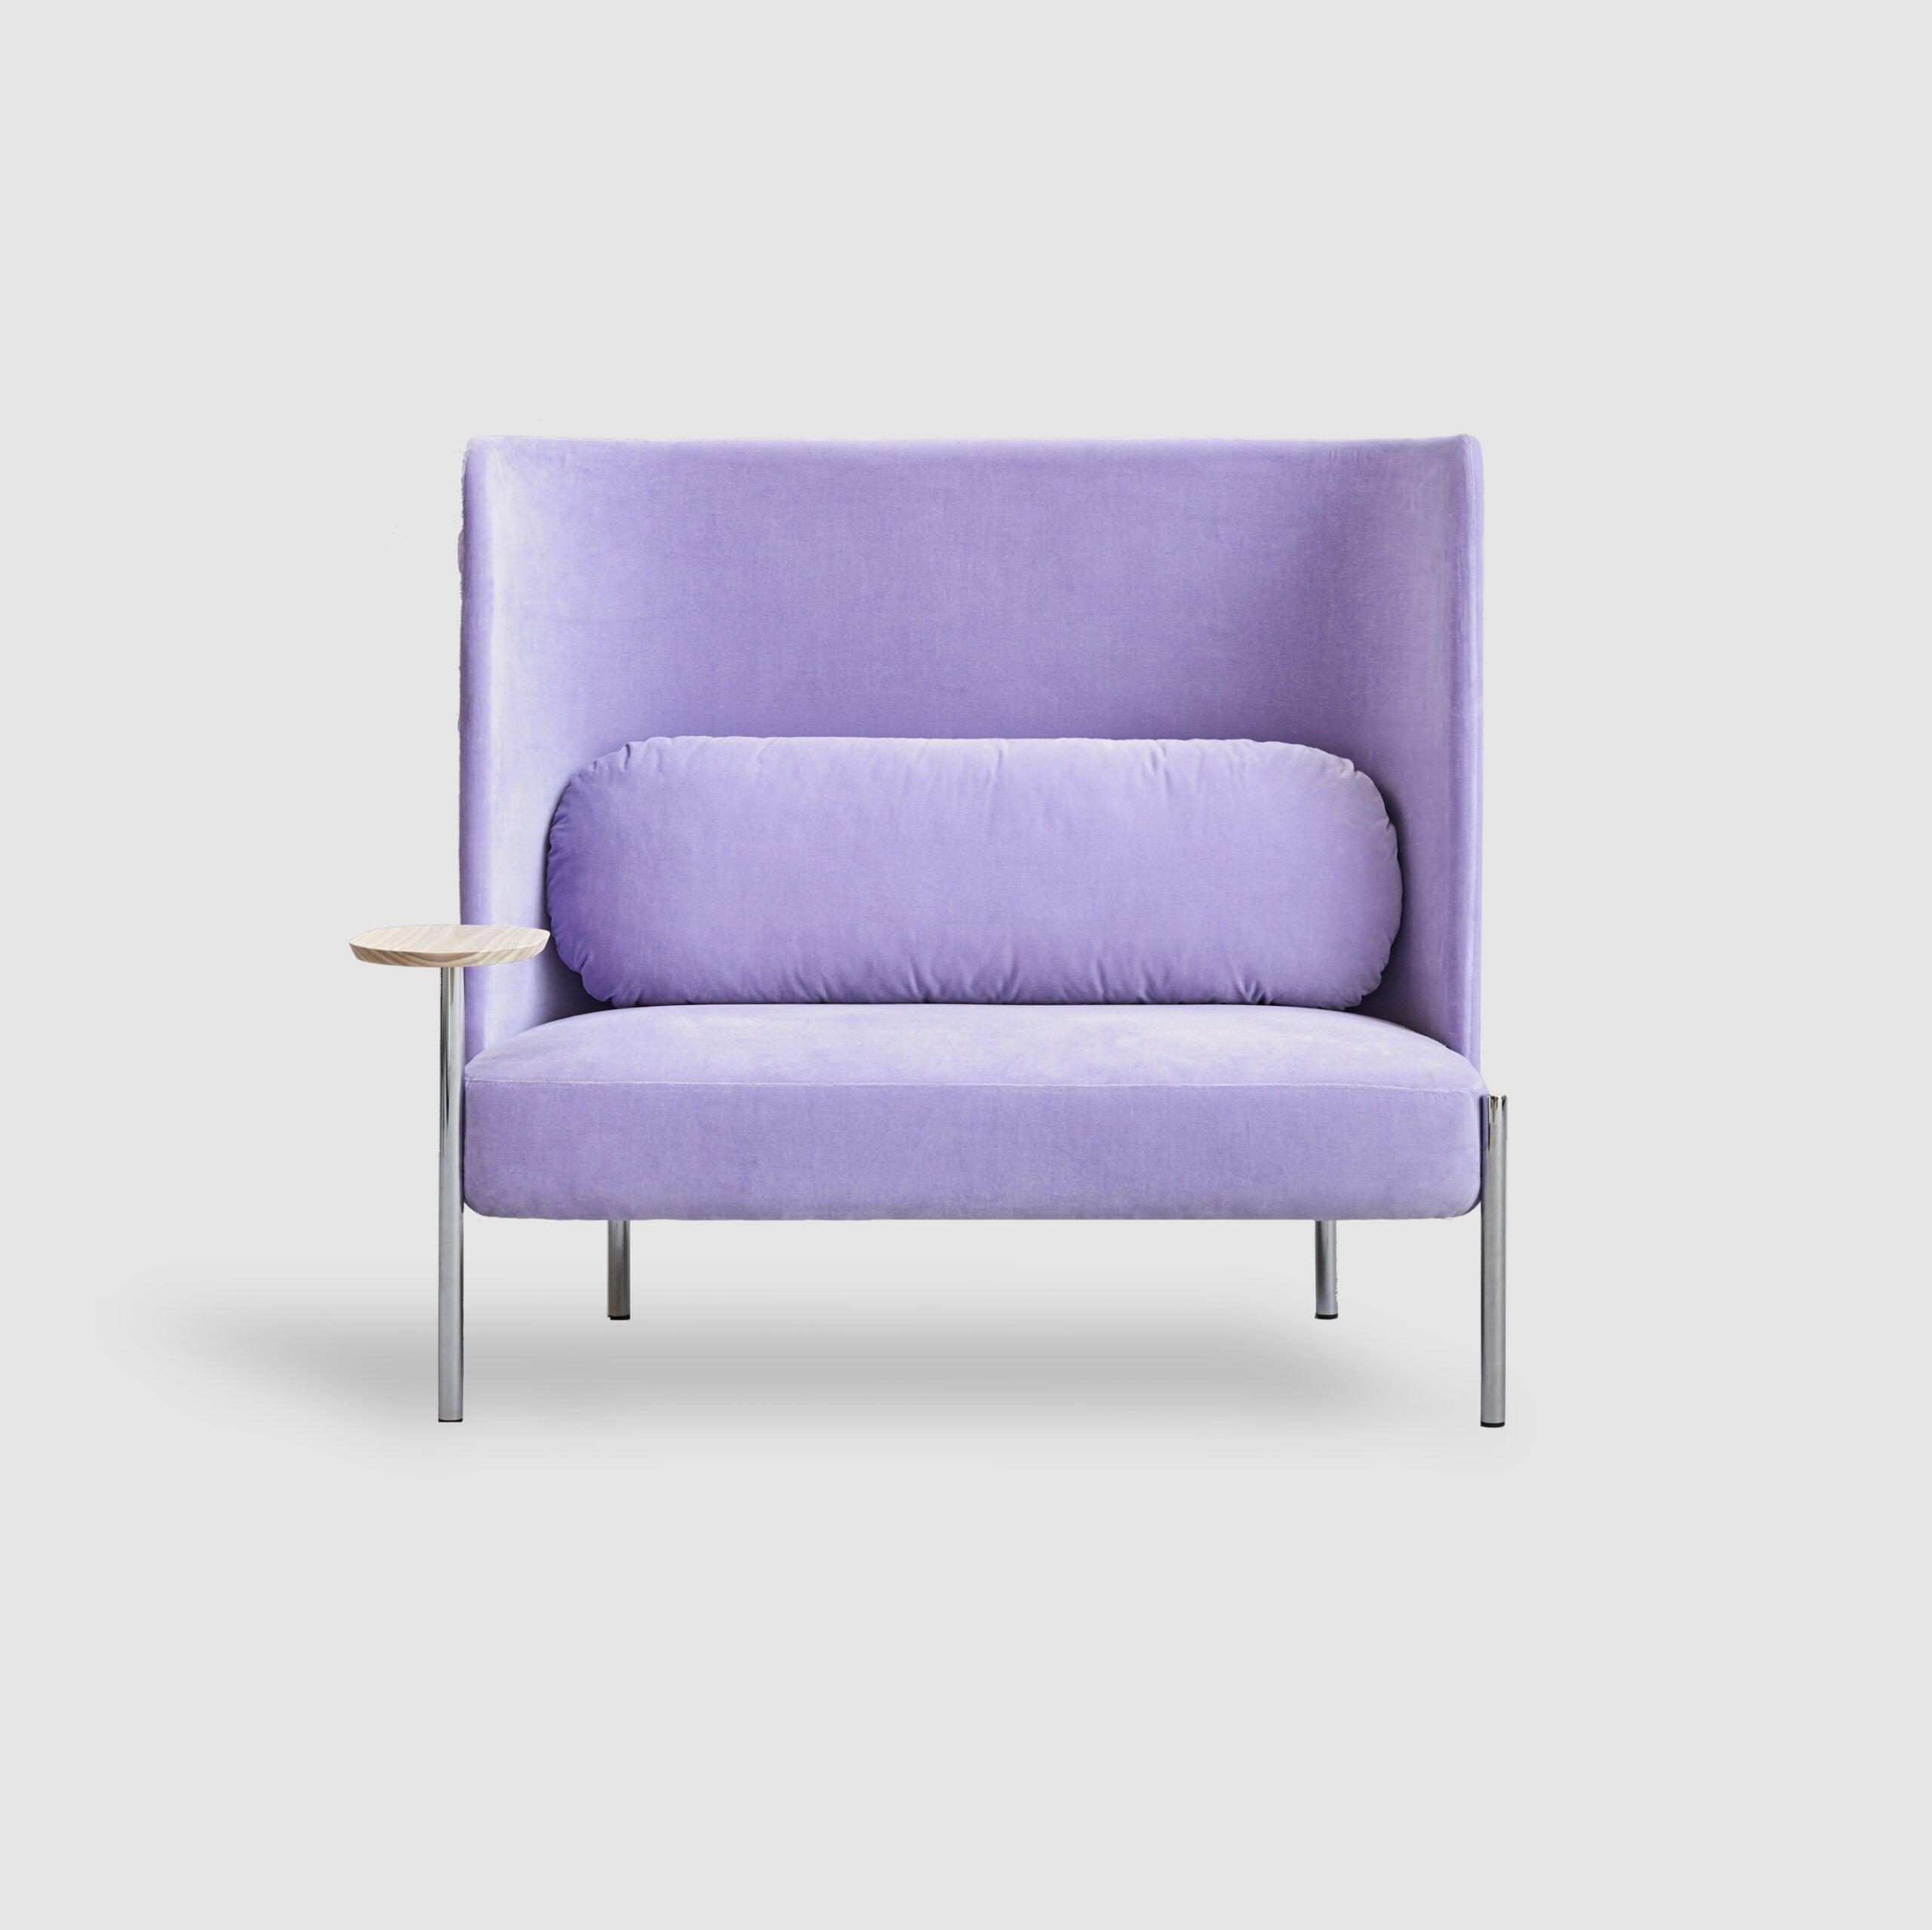 Ara sofa with side table by PerezOchando
Dimensions: W130, D75, H123, Seat45
Materials: Iron backrest structure and pine wood seat structure
Foam CMHR (high resilience and flame retardant) is used for the seats
Cushion 50% goose feathers and 50%